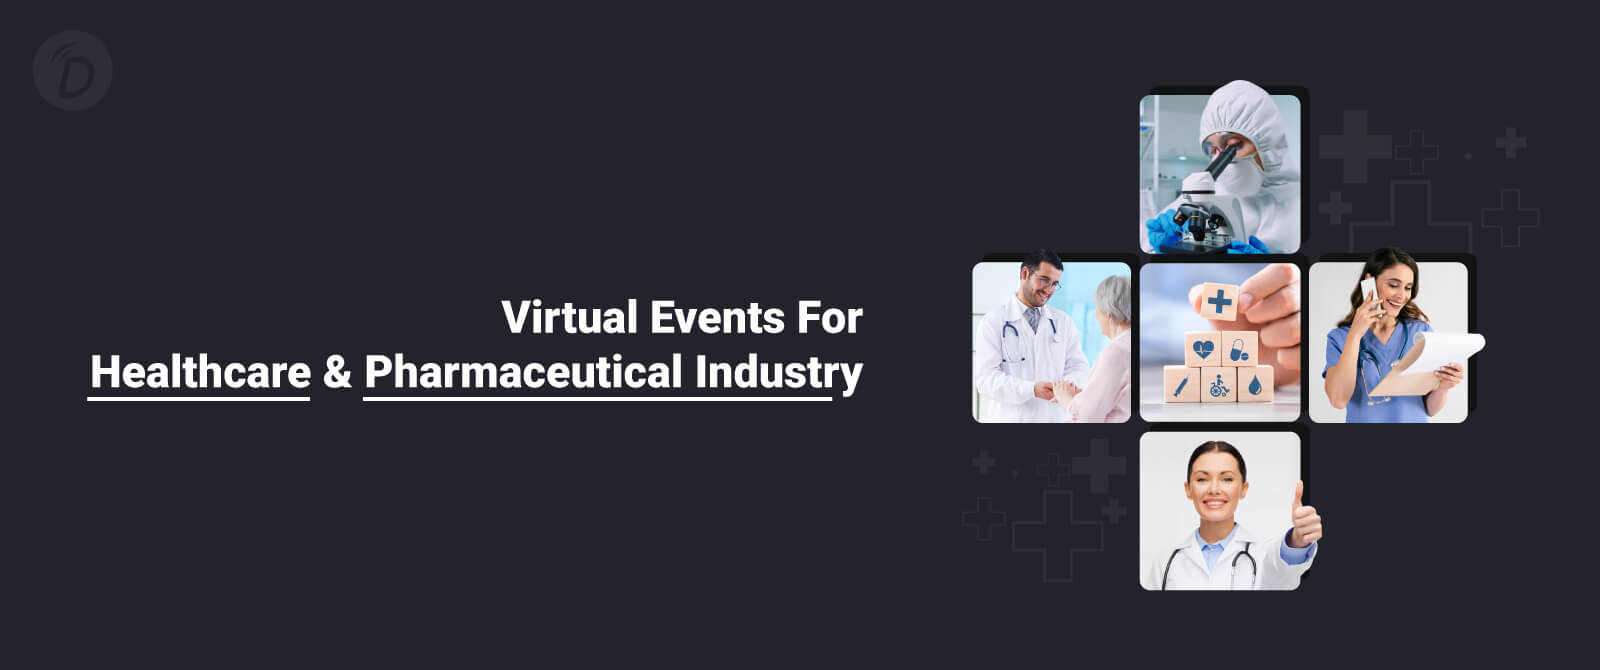 Virtual Trade Fair For the Healthcare Industry